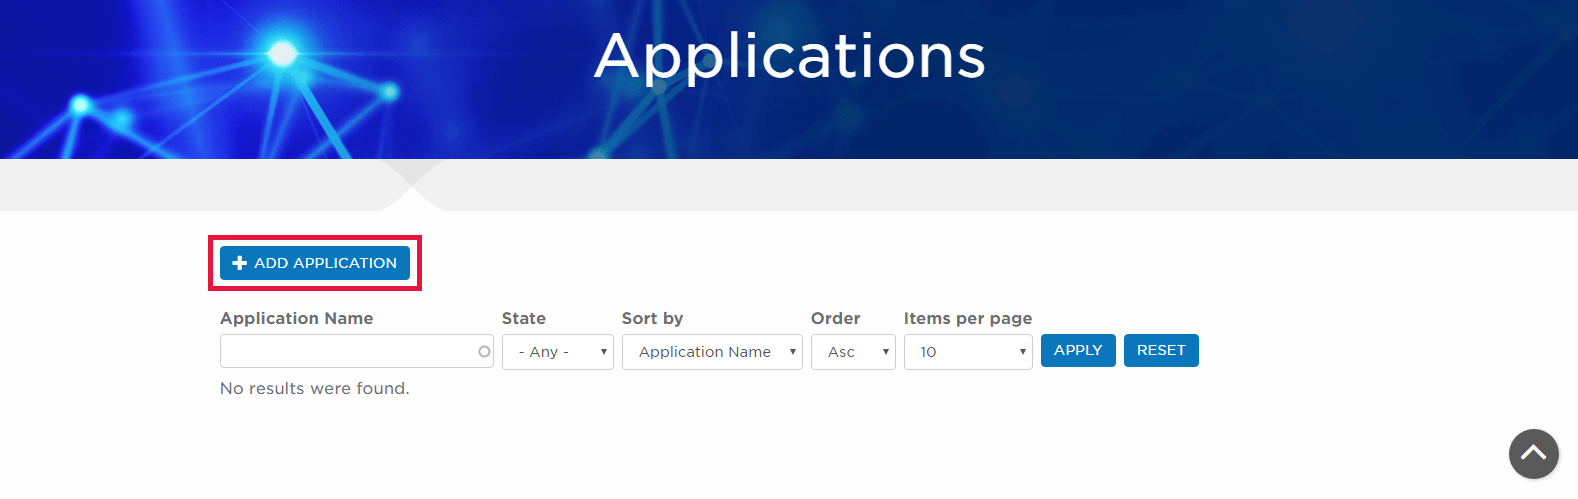 Image of the application creation page